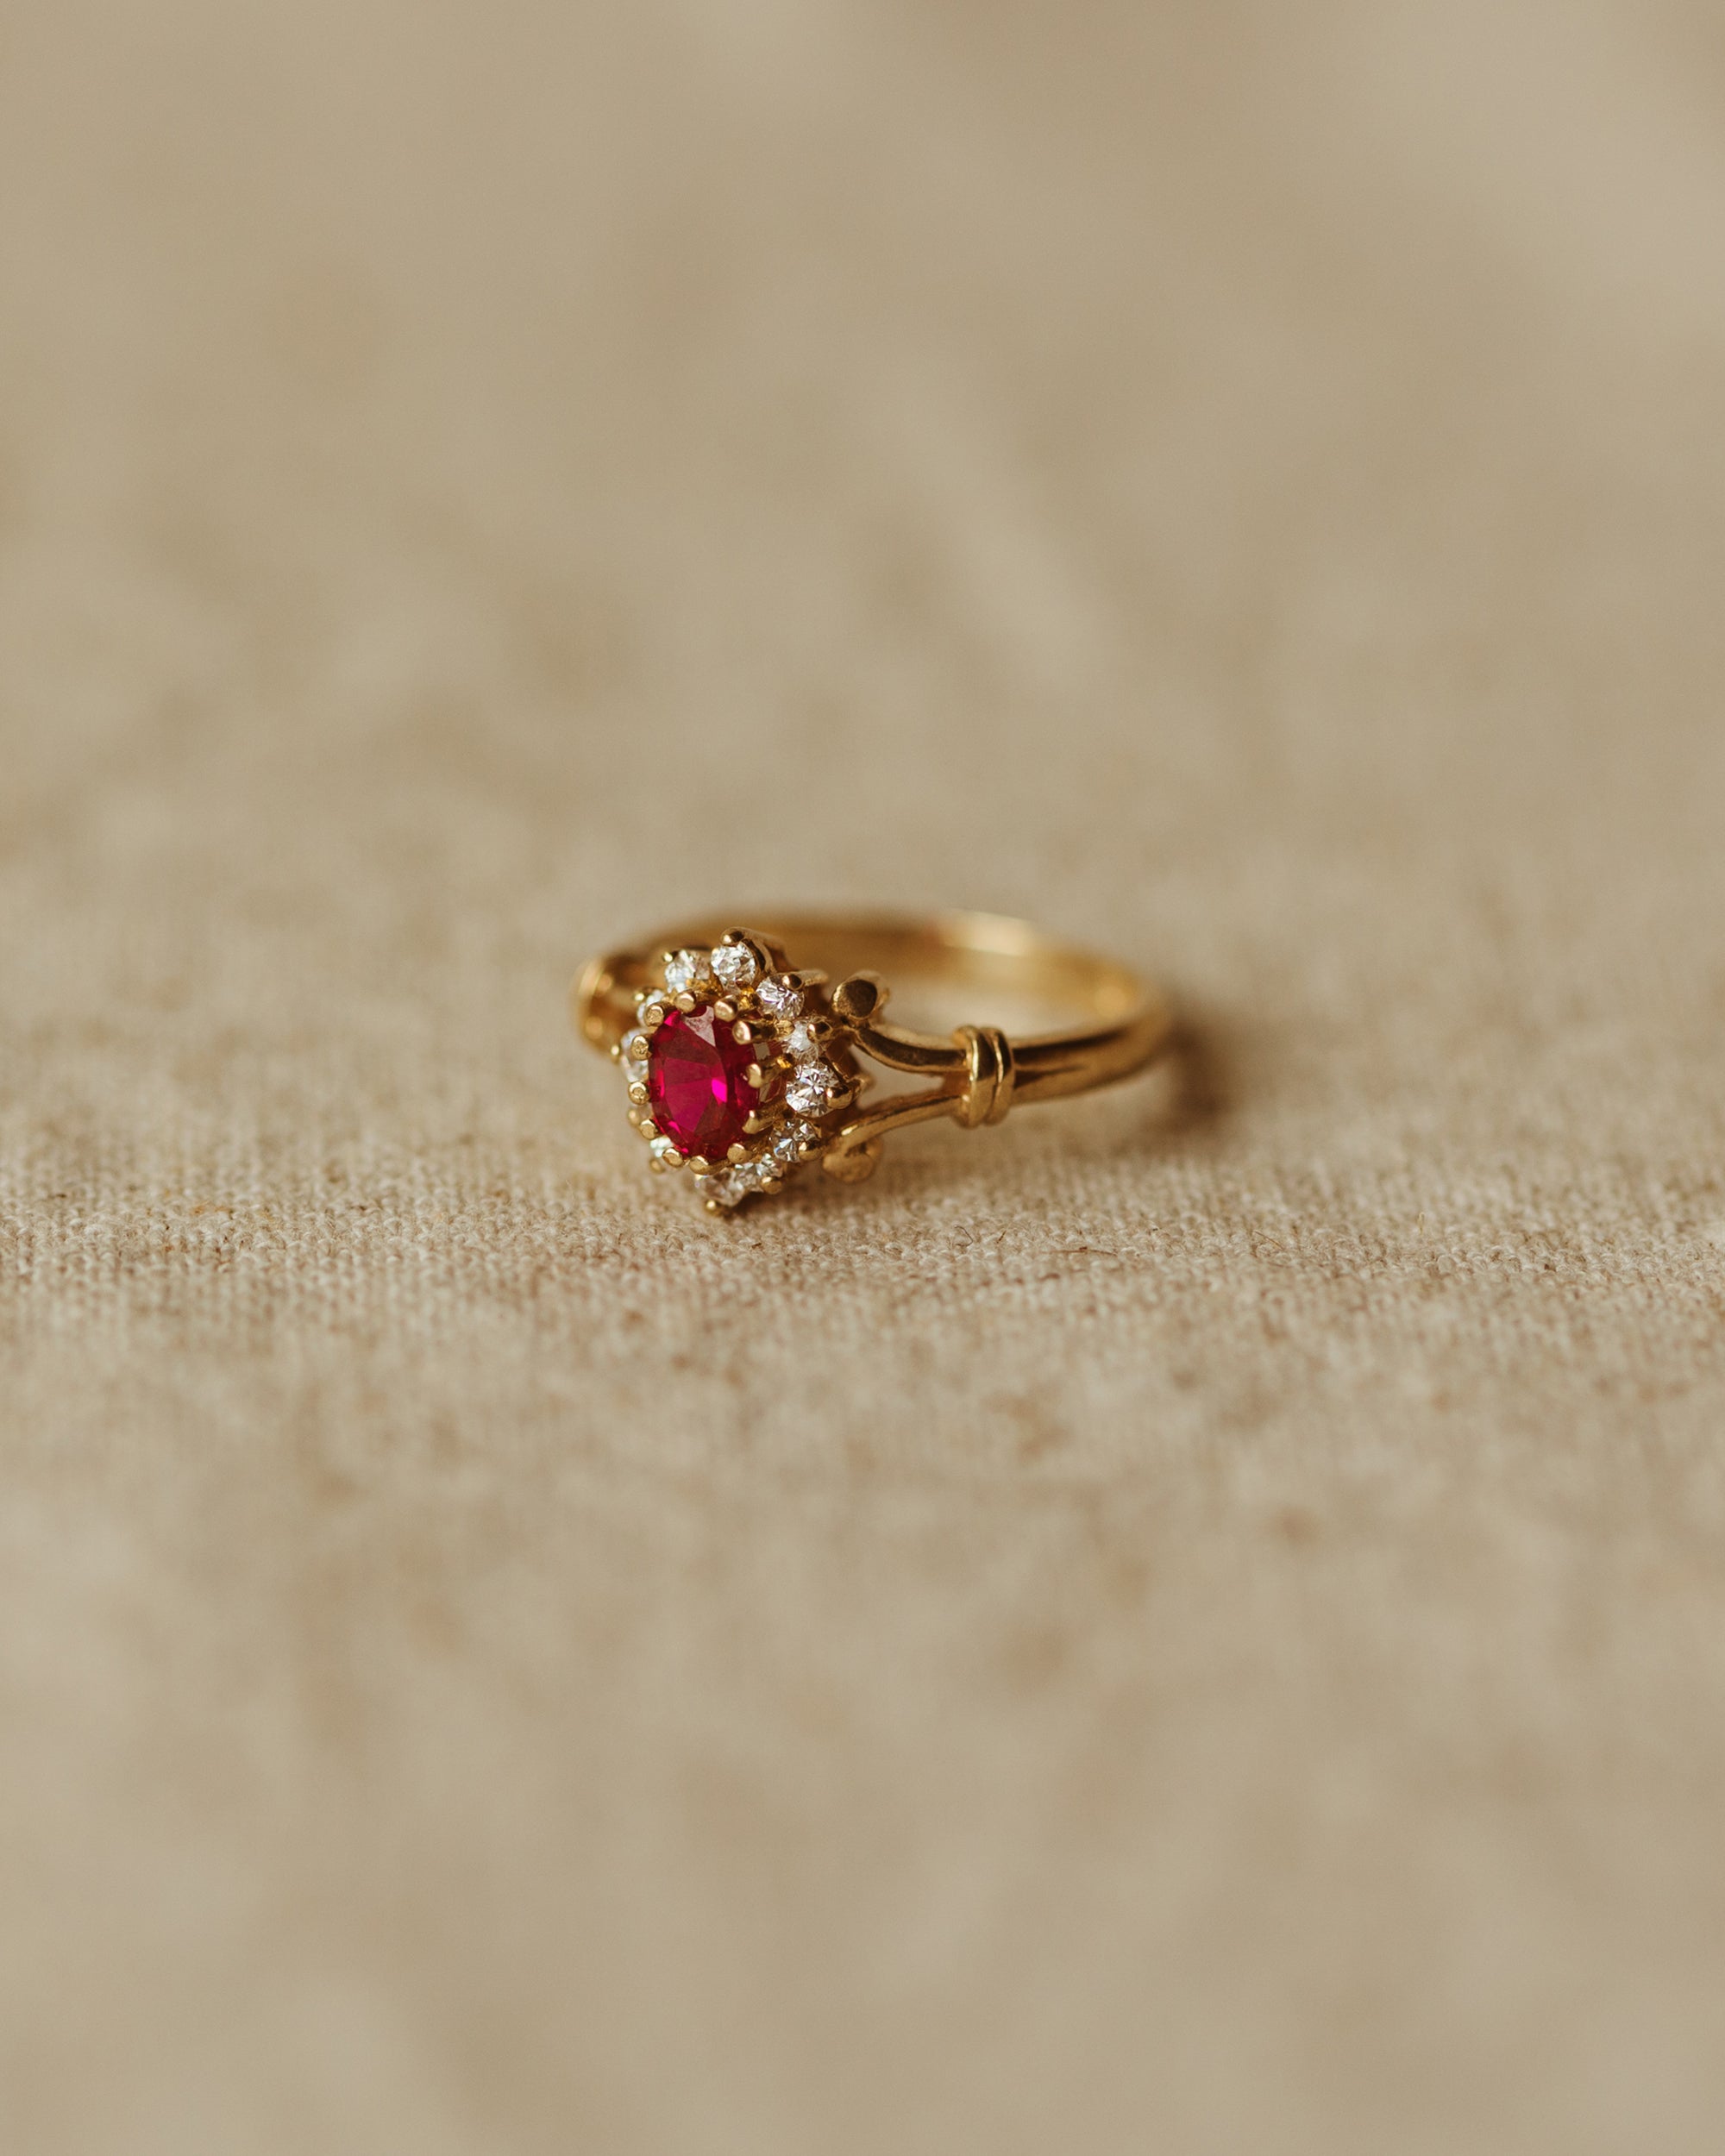 Ruby Ring Archives  Klepners Fine Antique Jewellery  Valuers Antique  Engagement Rings